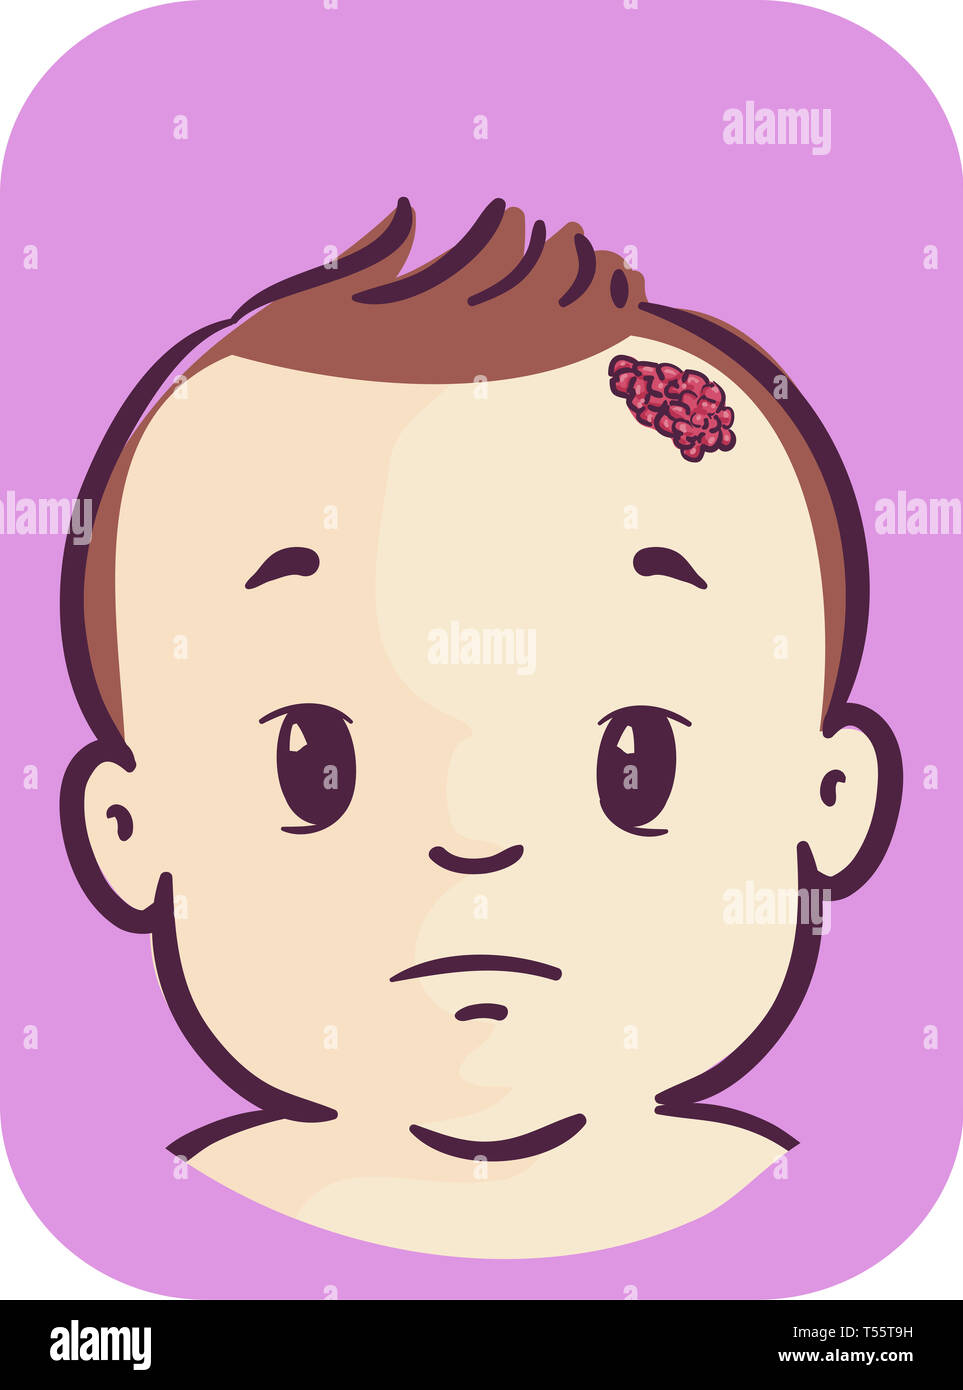 Illustration of a Baby Kid Boy with a Strawberry Nevus on His Forehead Stock Photo